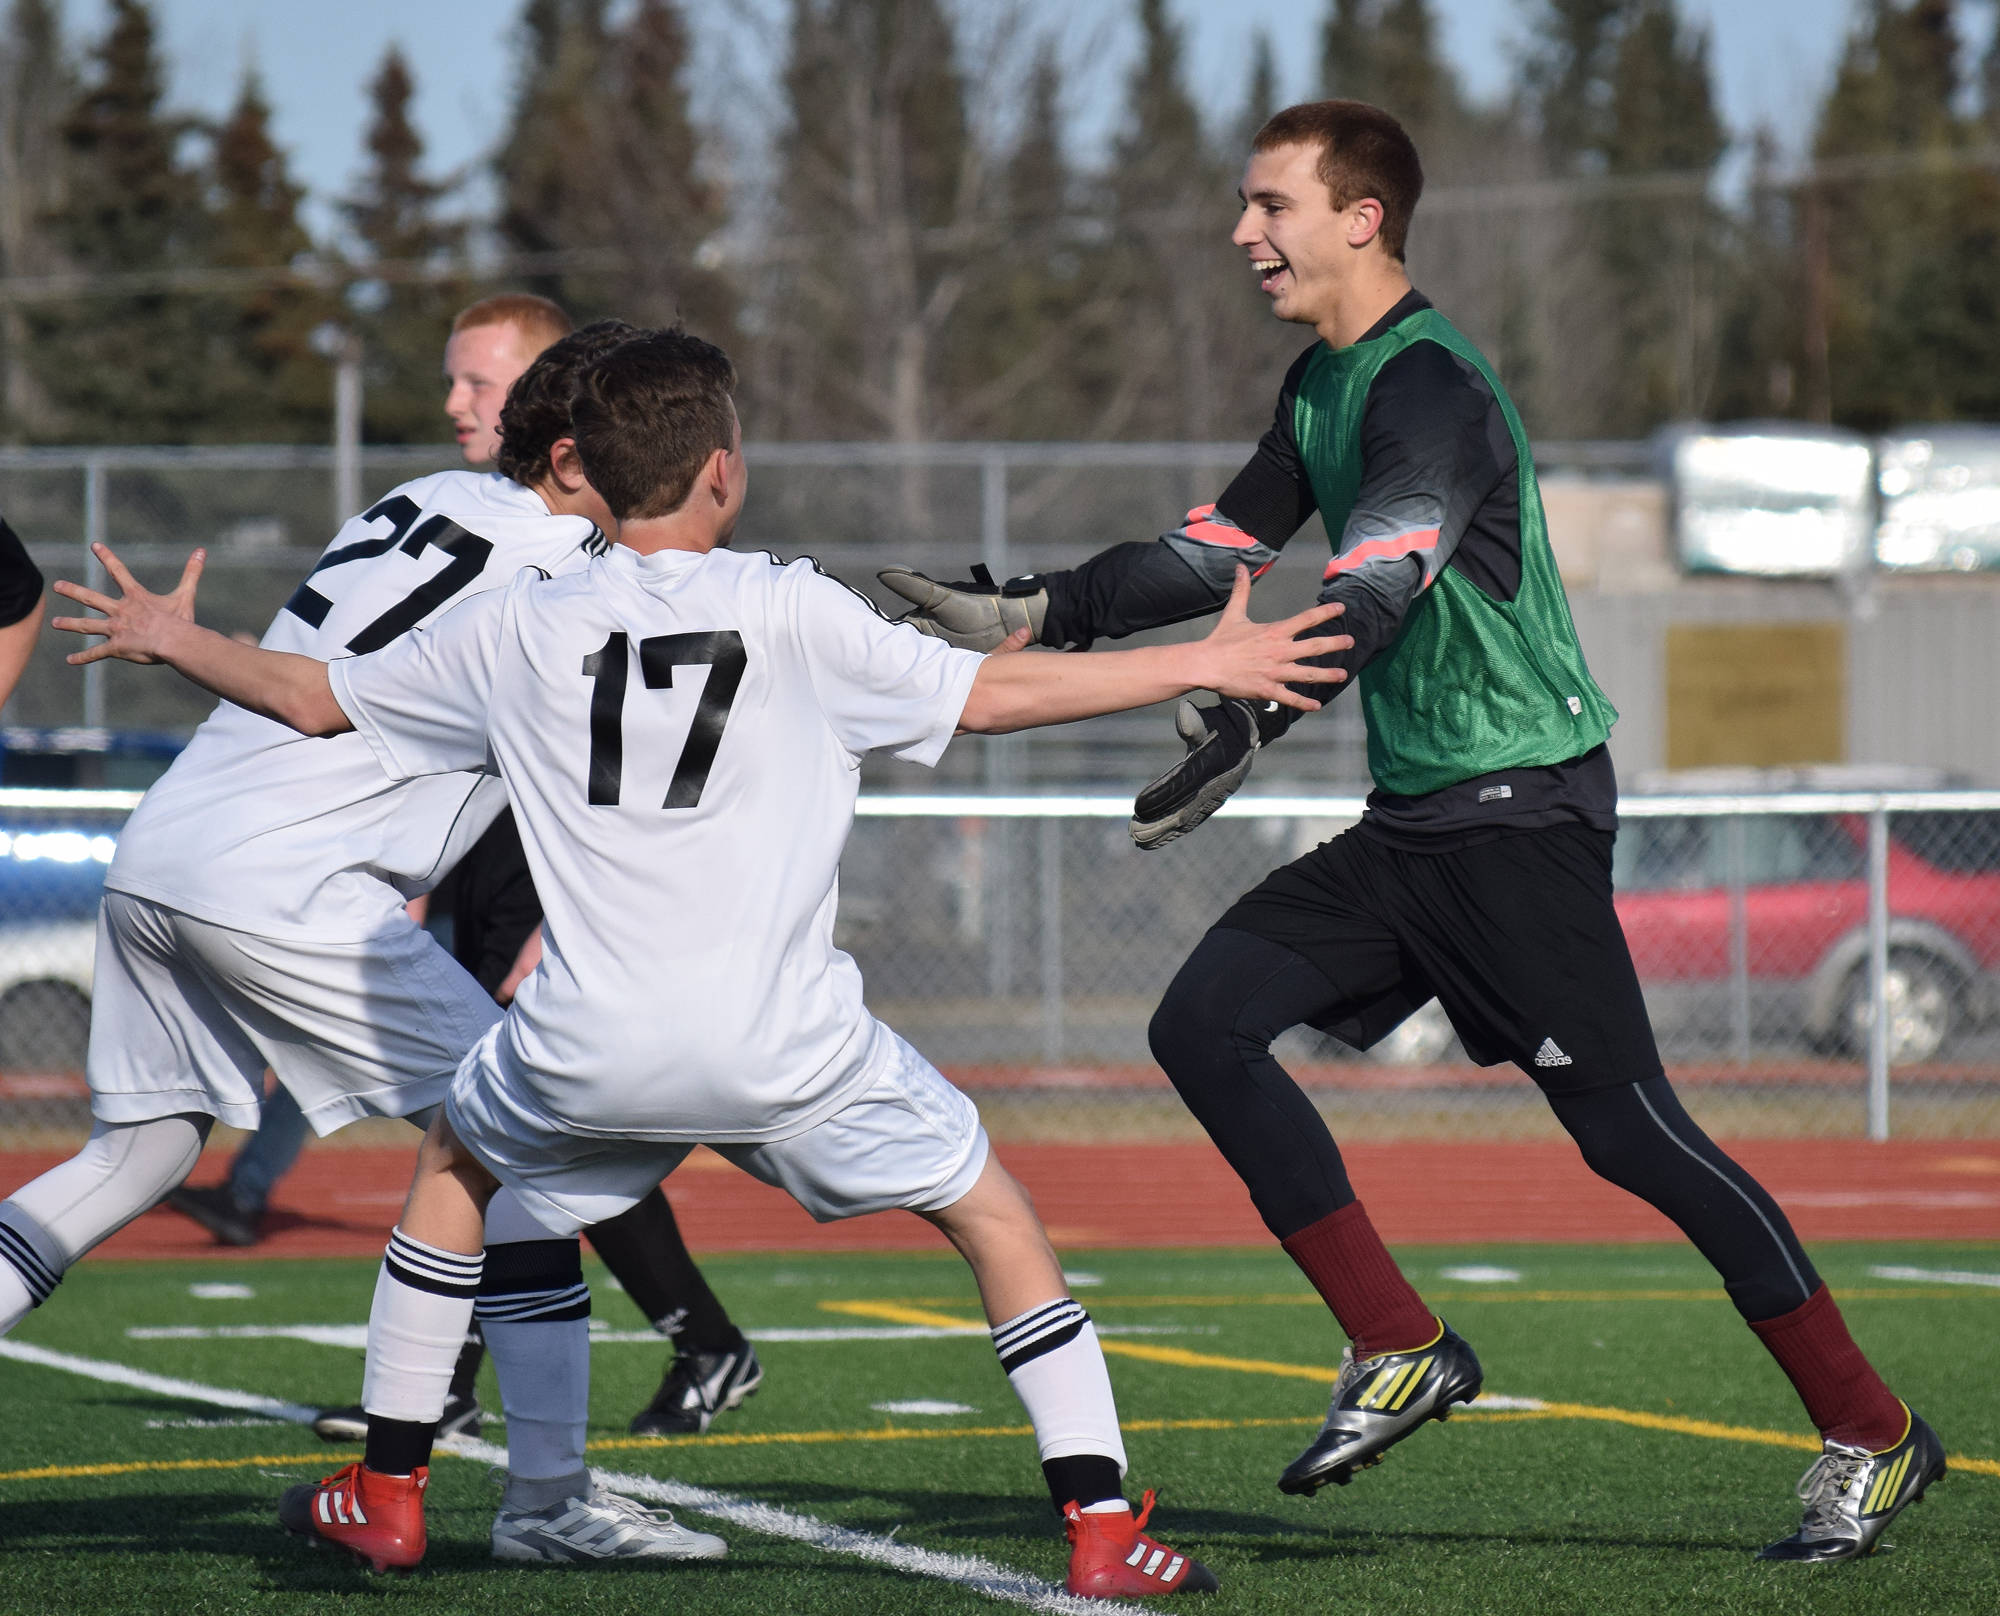 Kenai Central goalkeeper Tristan Landry celebrates with teammates after scoring on a penalty kick against Nikiski Friday afternoon at Ed Hollier Field in Kenai. (Photo by Joey Klecka/Peninsula Clarion)